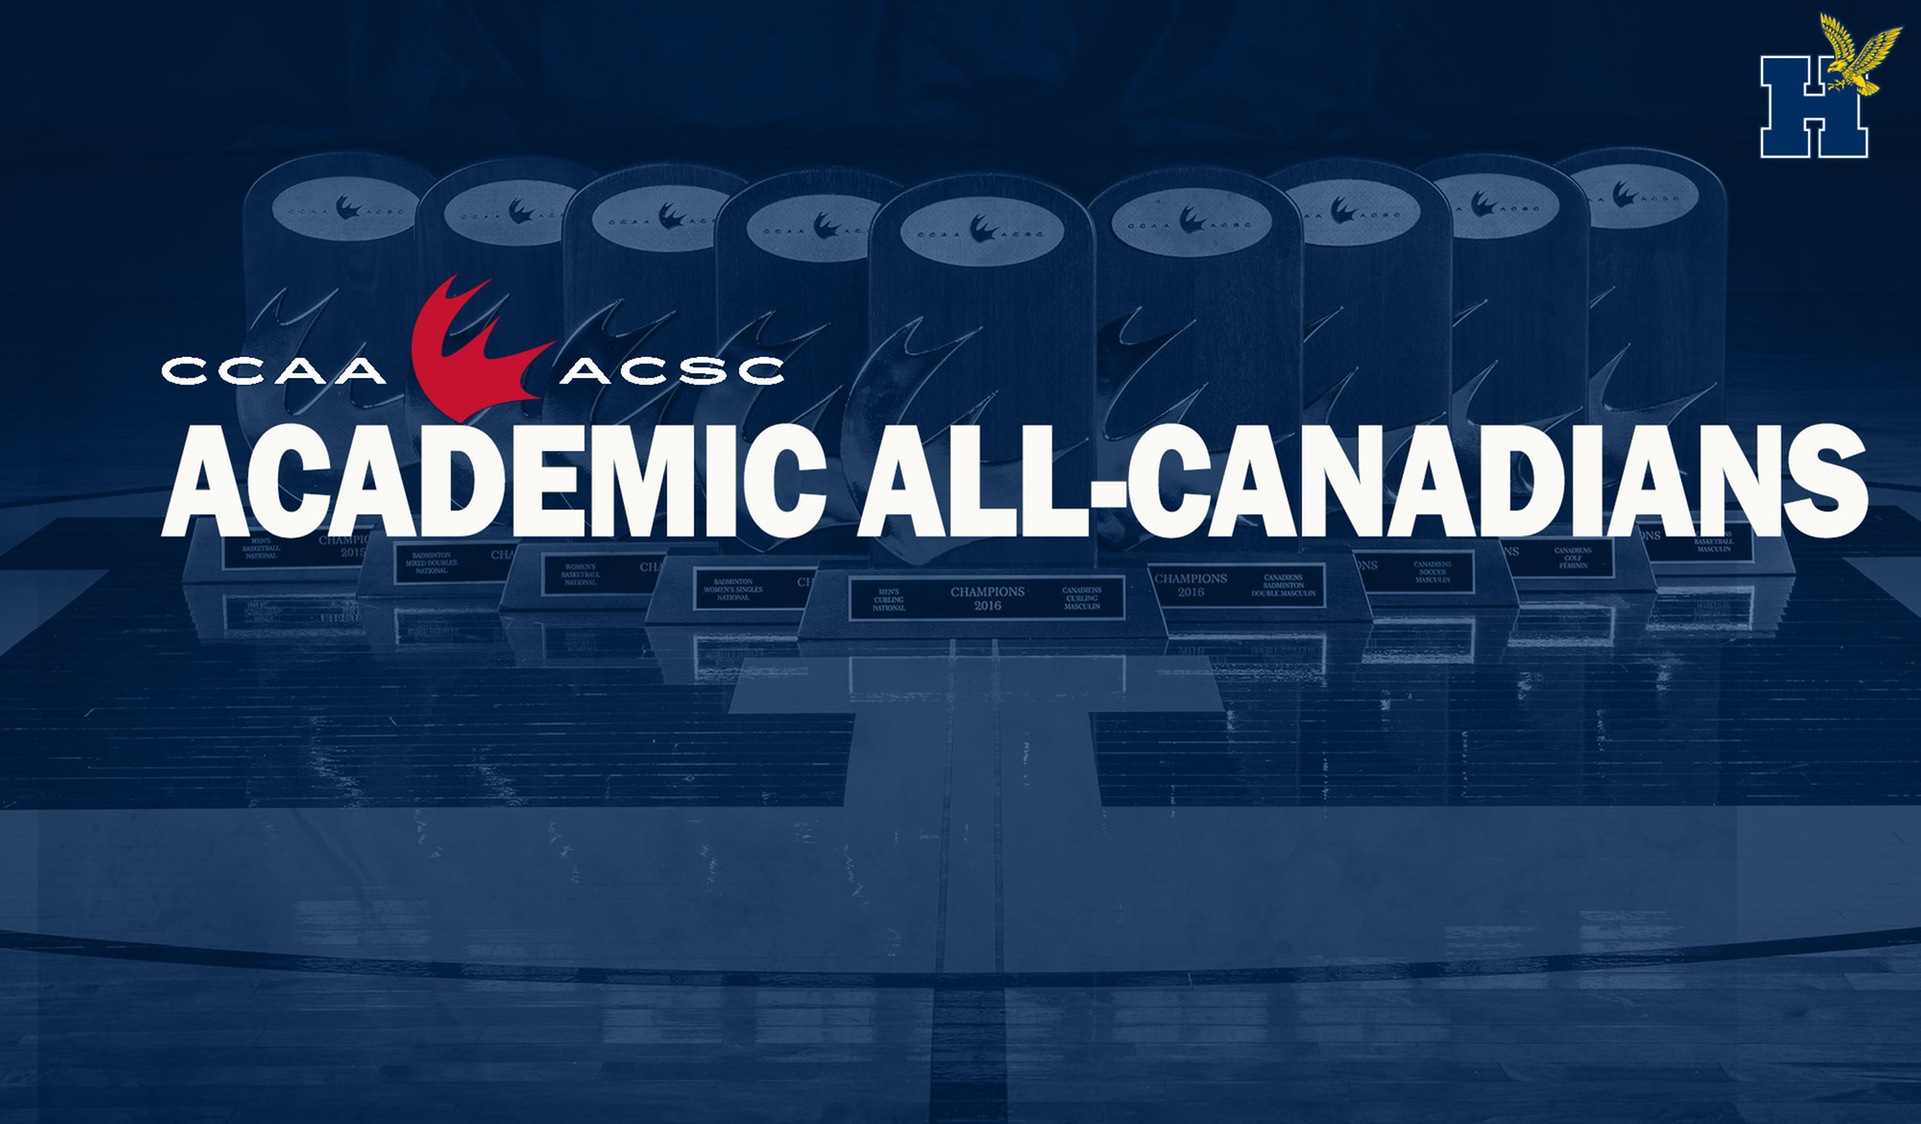 Humber Leads the Nation With 15 CCAA Academic All-Canadian Selections